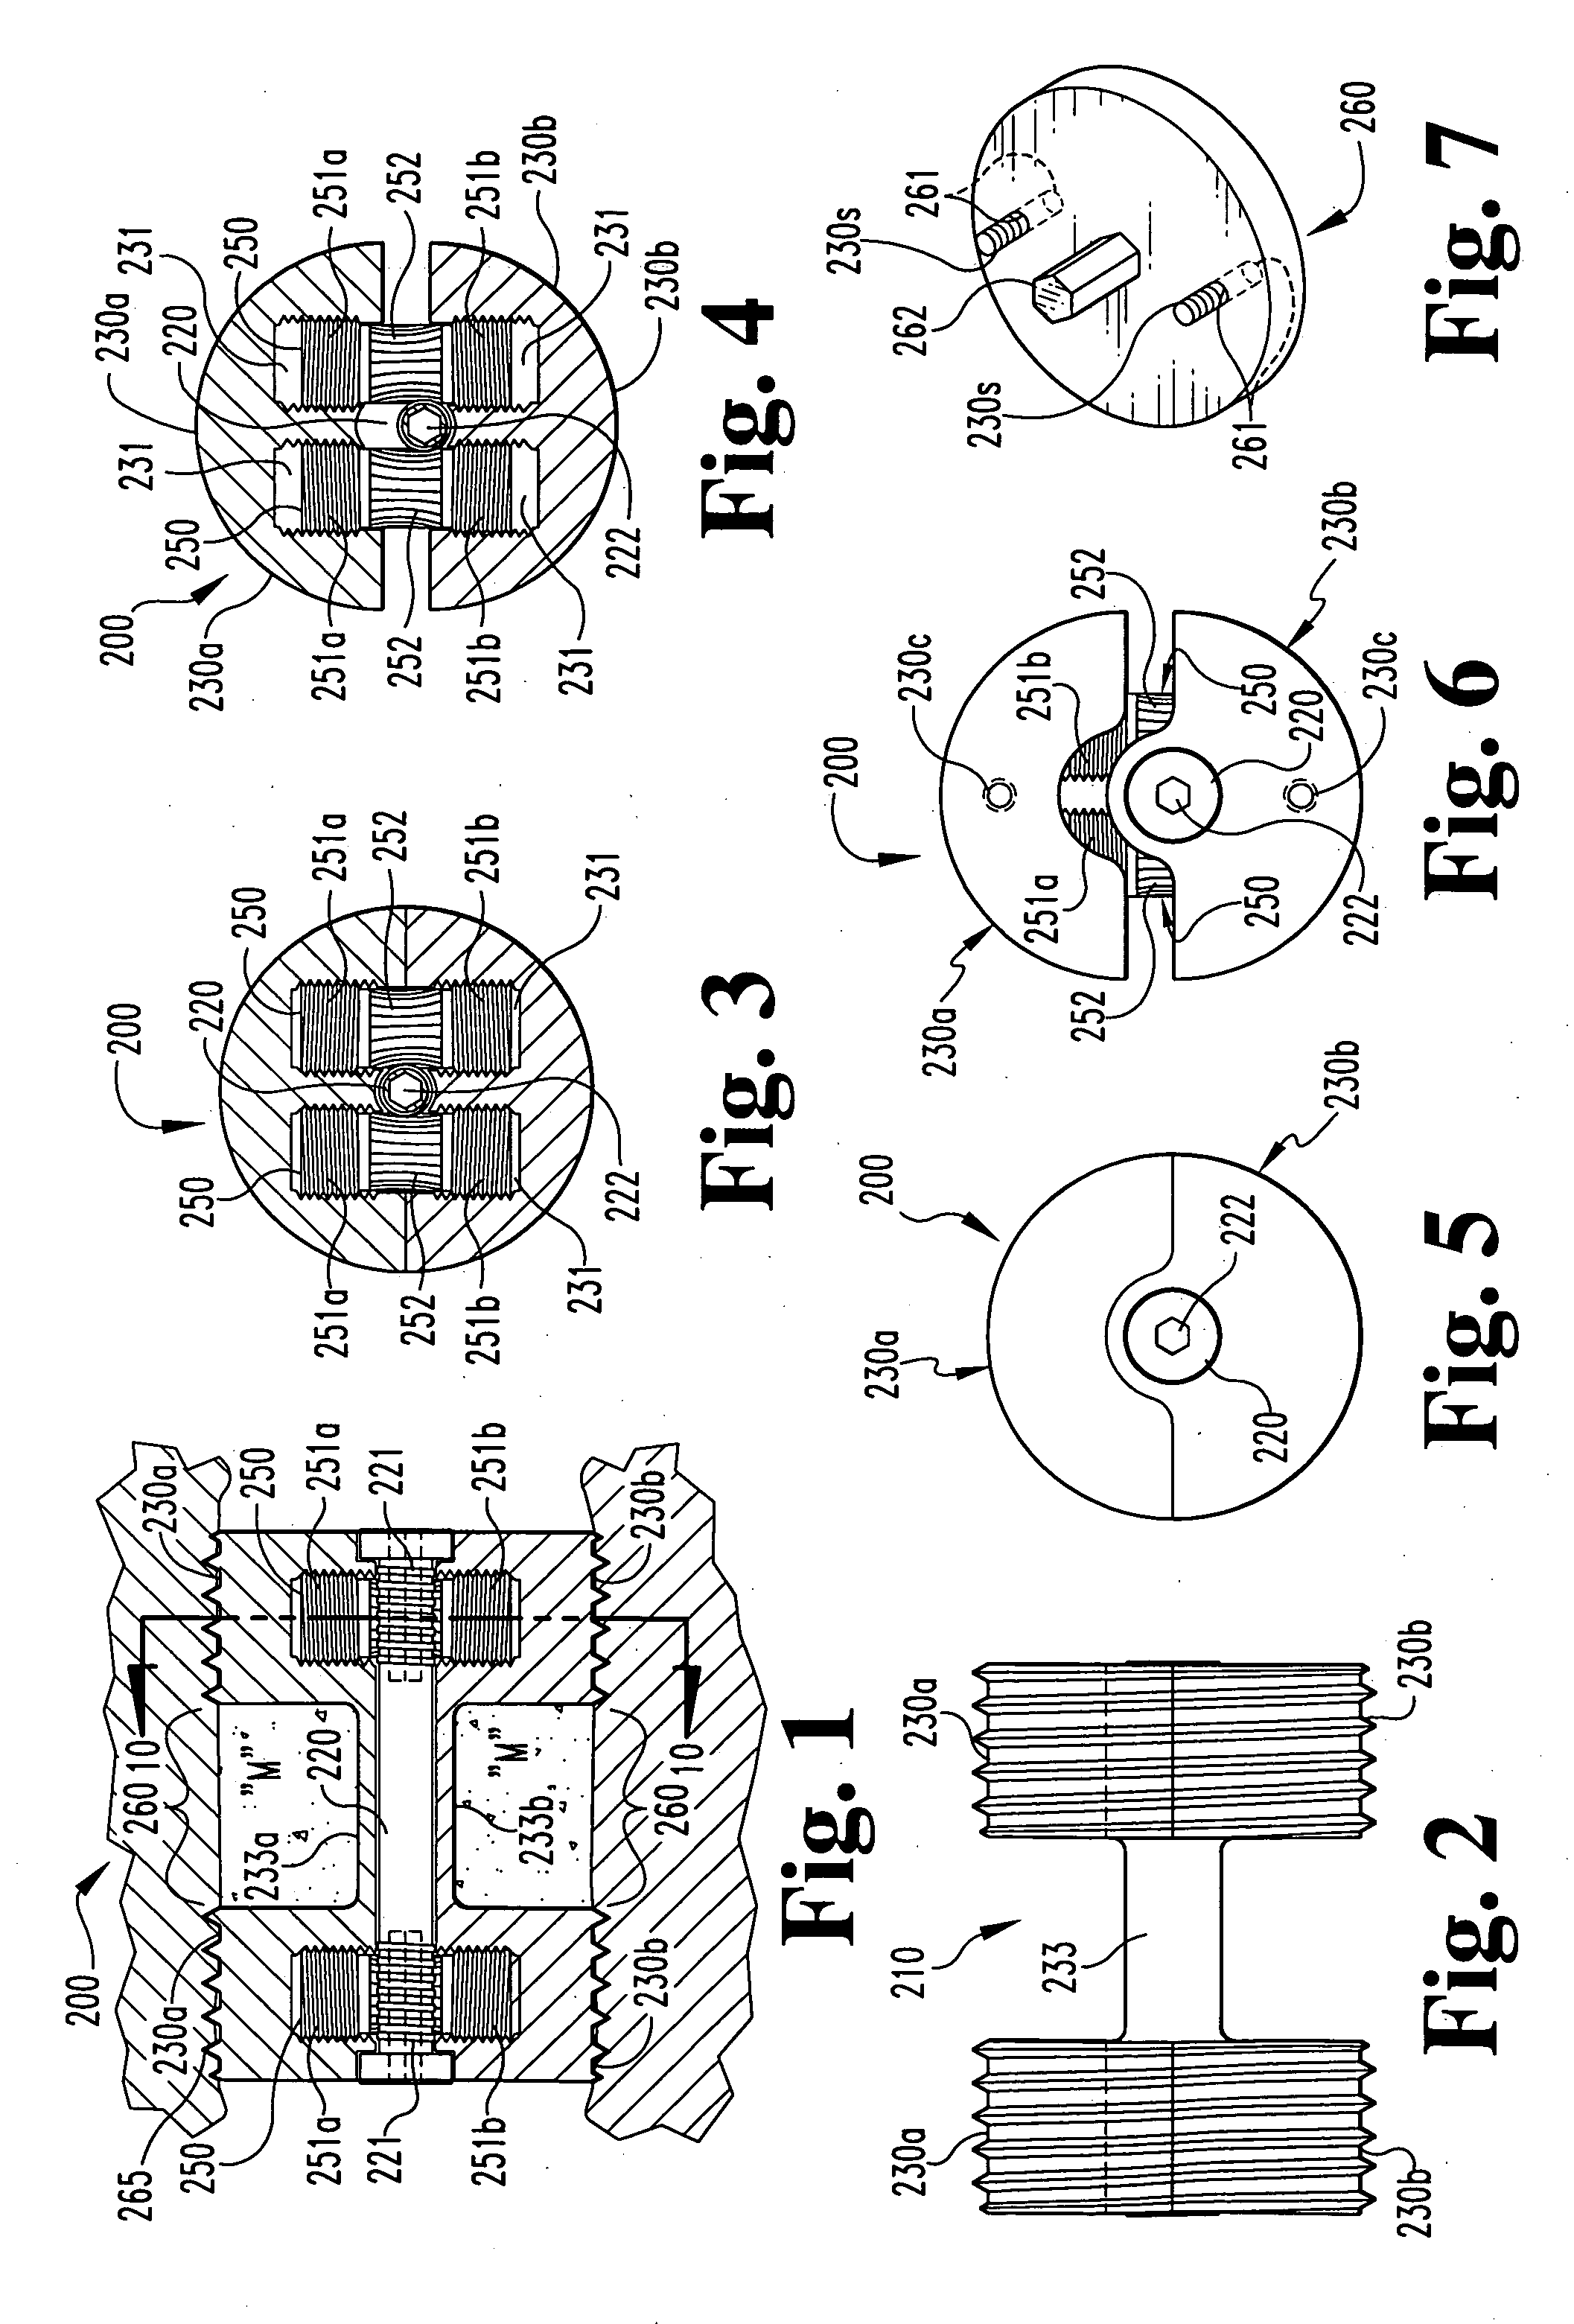 Expandable spinal fusion device and methods of promoting spinal fusion